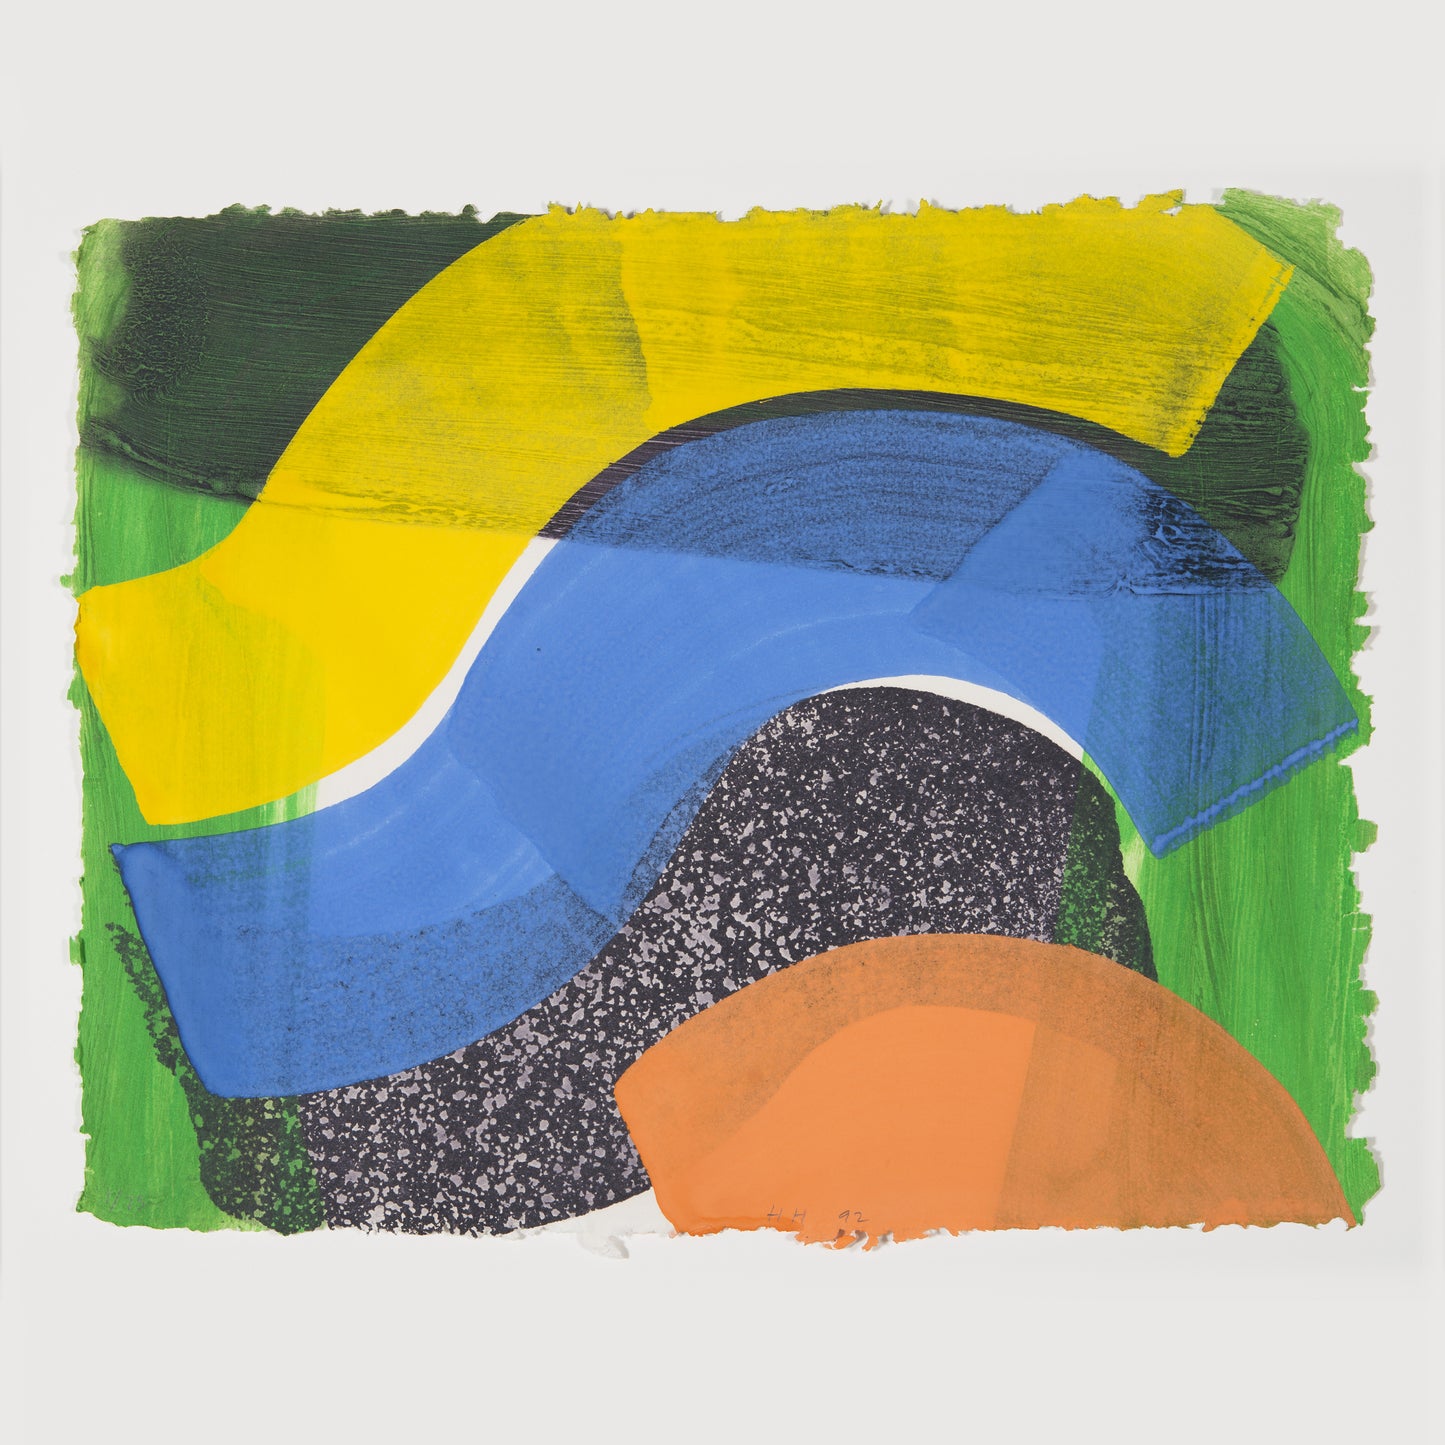 Put Out More Flags, 1992 Hand-colored lithograph Edition of 25 by Howard Hodgkin